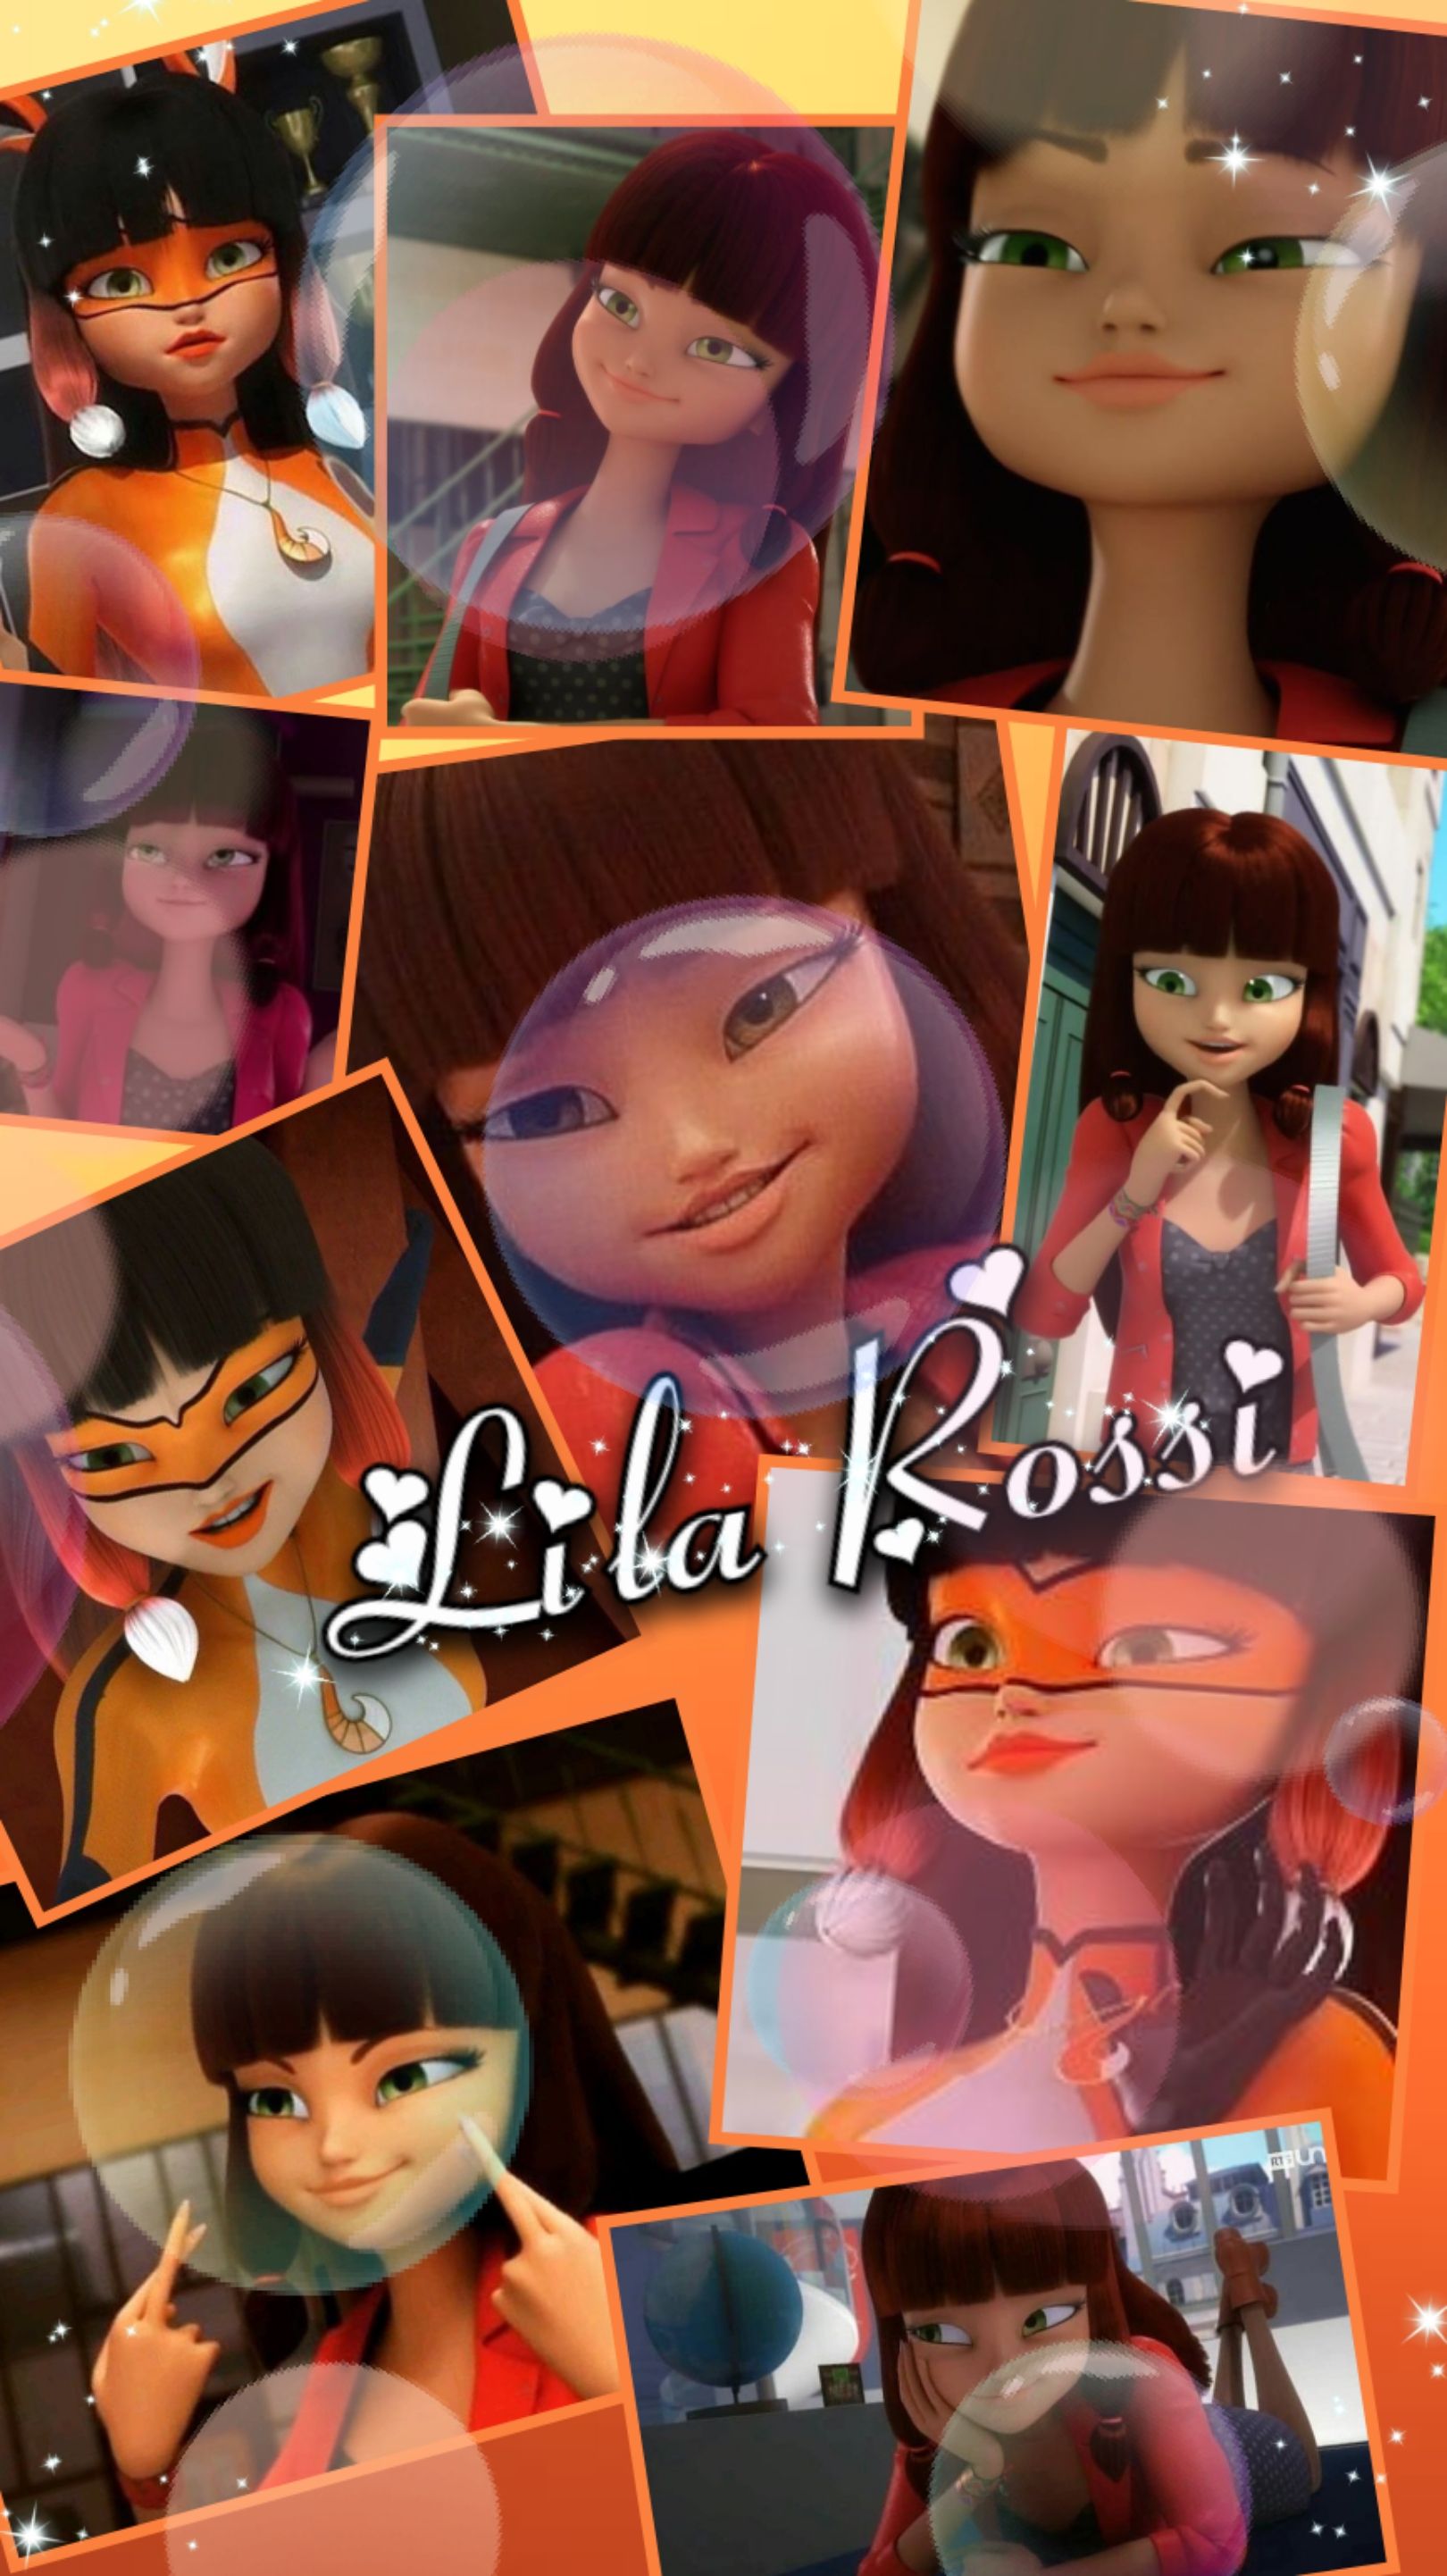 Made a lila wallpaper, and you know I'm straight..but damn, if she had a better personality she'd be flawless